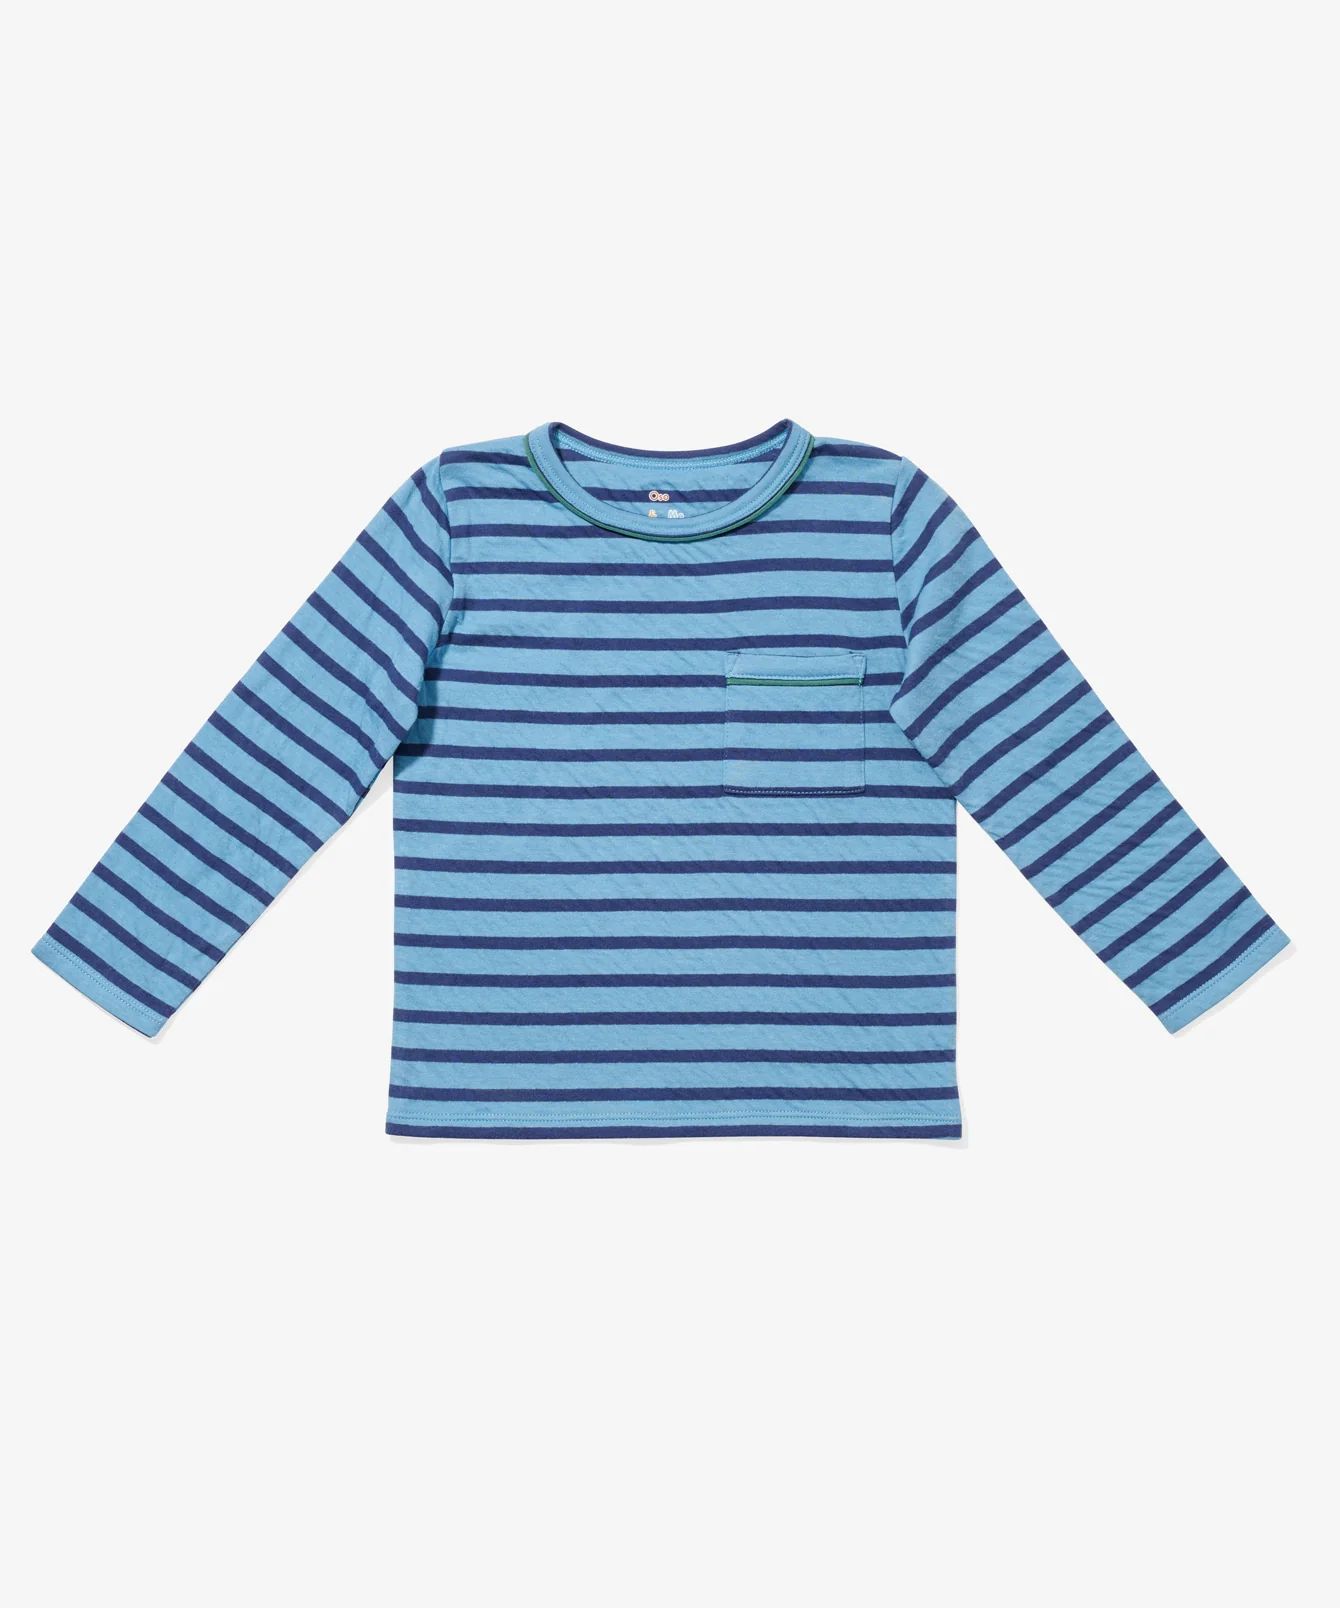 Super Soft Child Long Sleeve Shirt | Oso and Me | Oso & Me